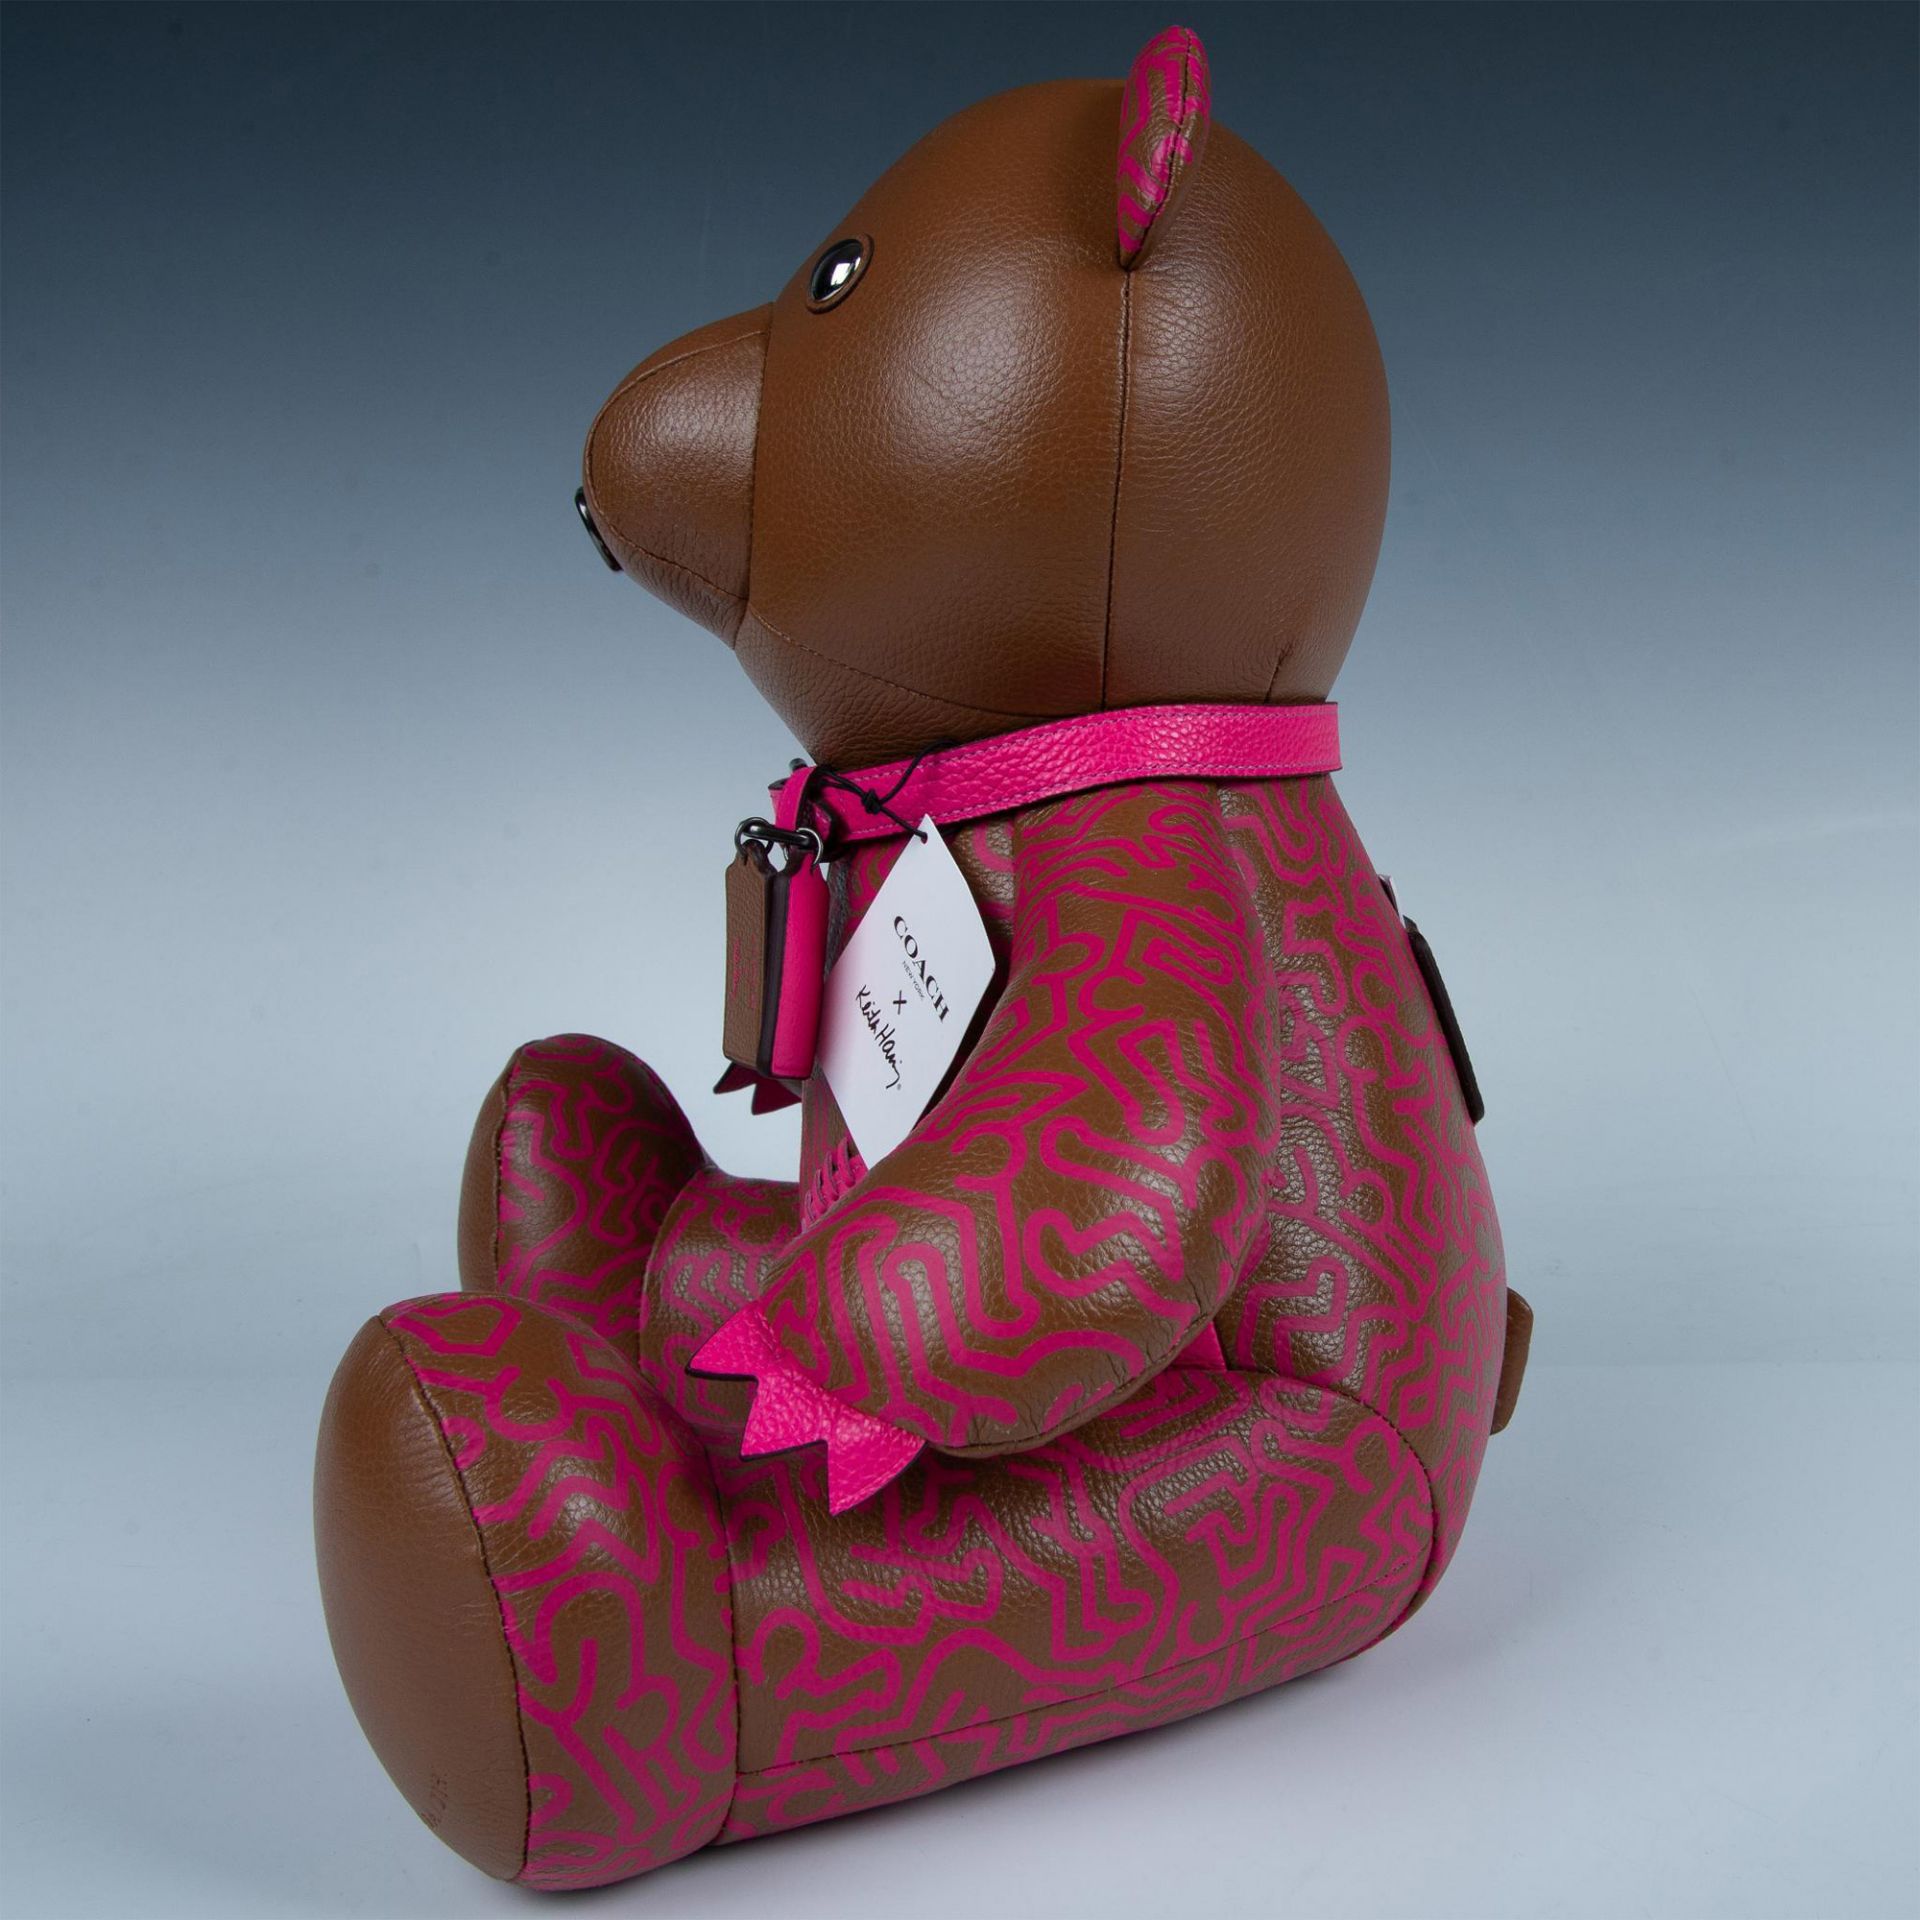 Coach Keith Haring Collaboration Plush Leather Teddy Bear - Image 4 of 7